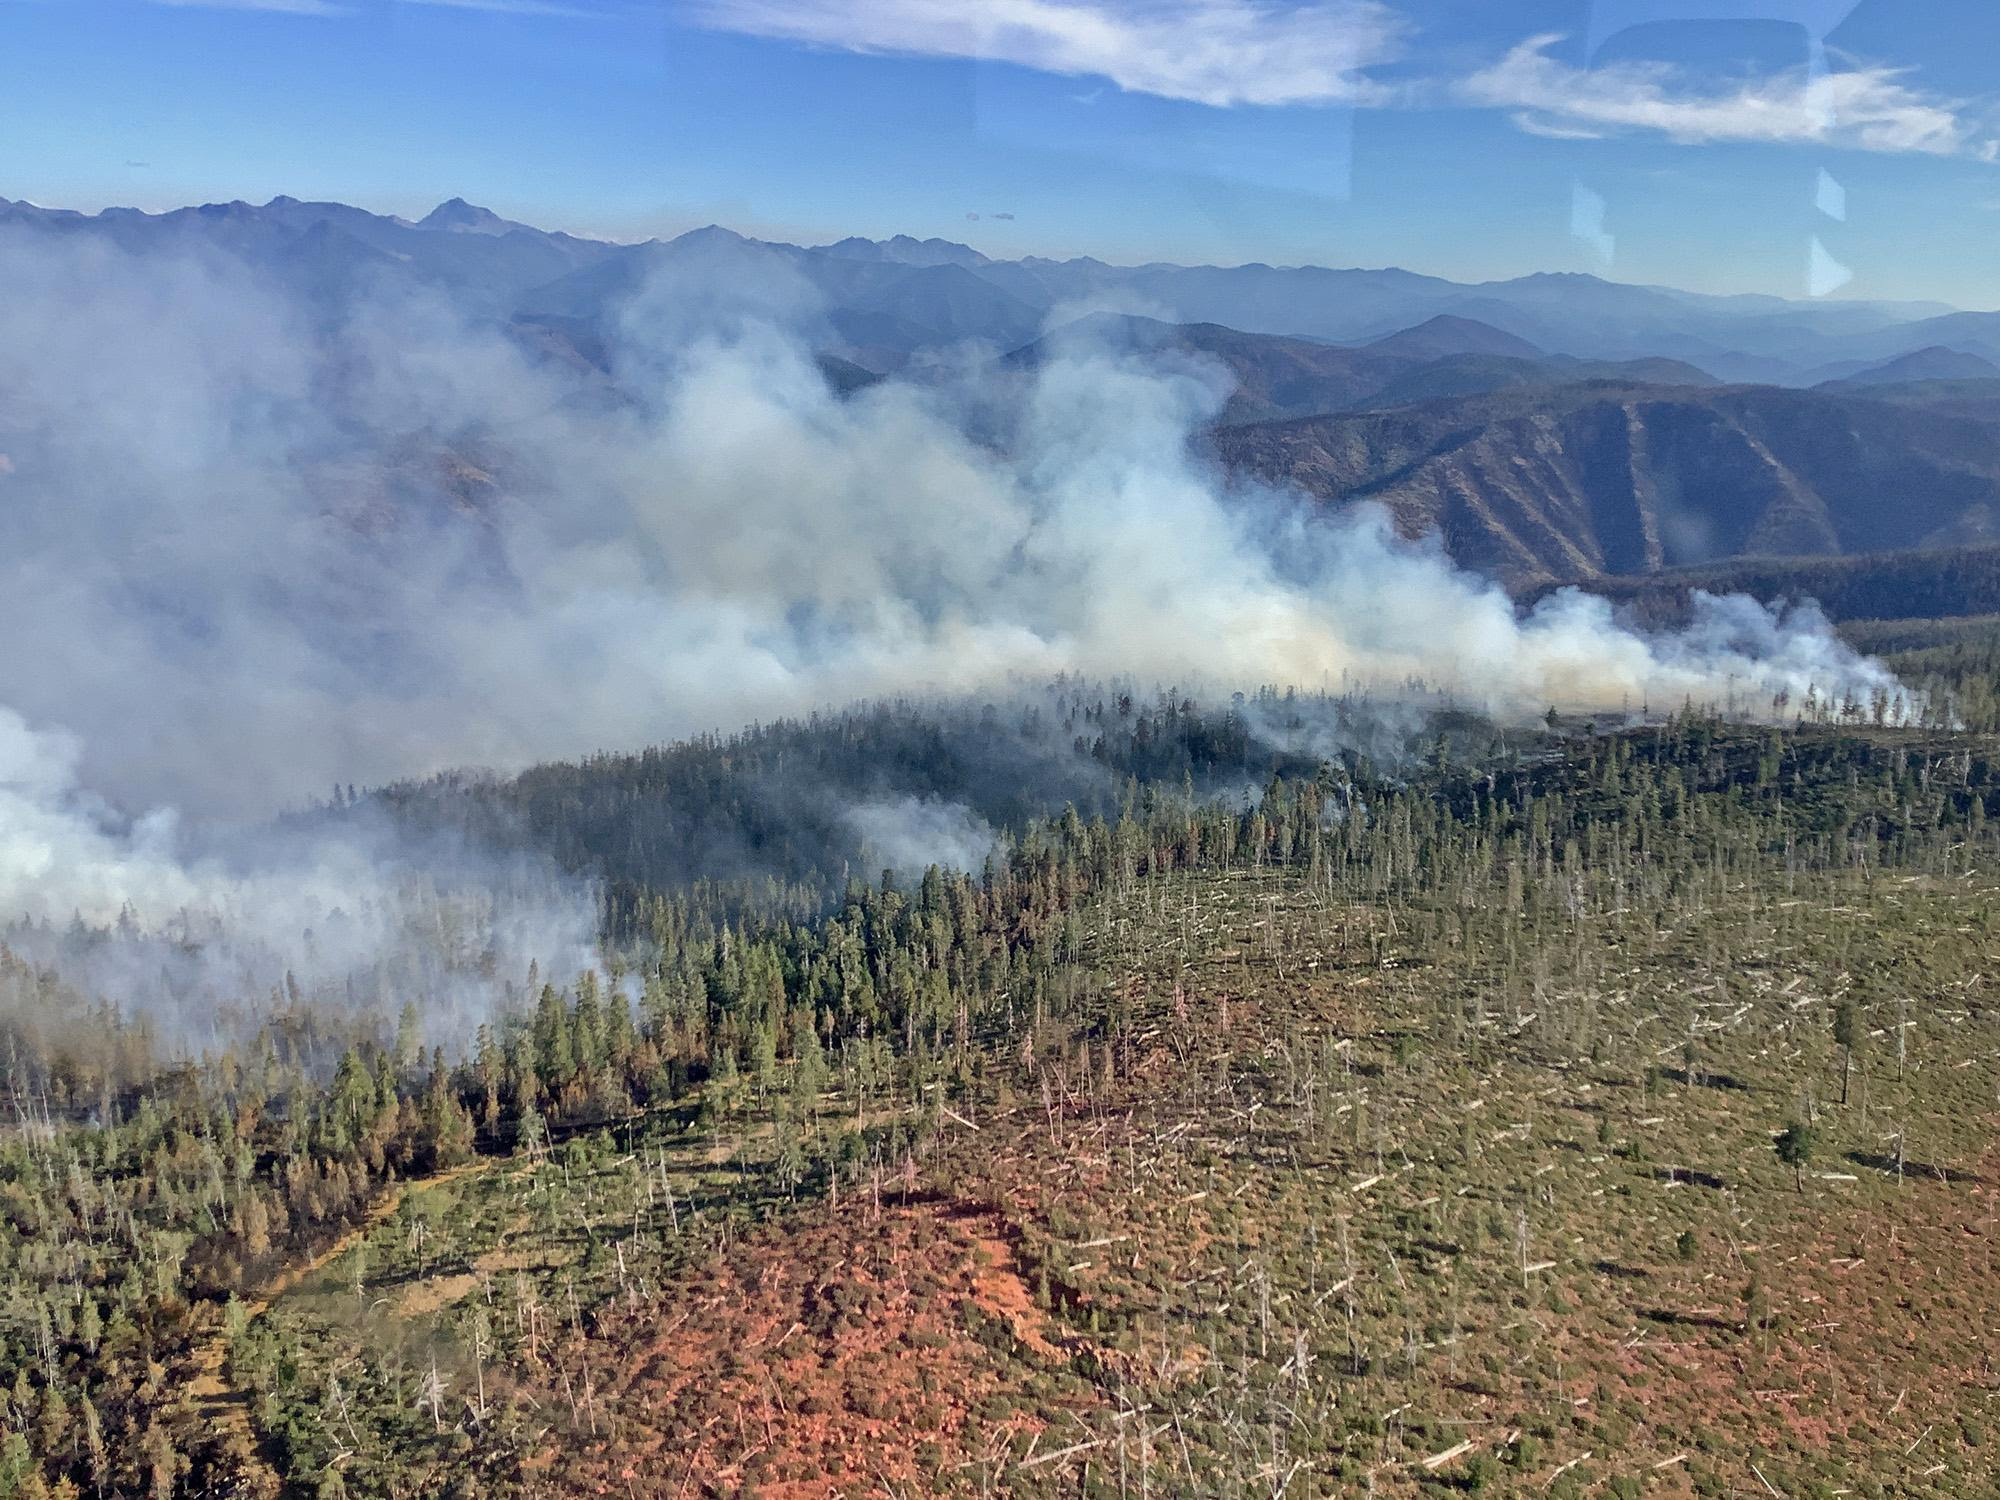 Aerial view of billowing smoke over a heavily forested area.